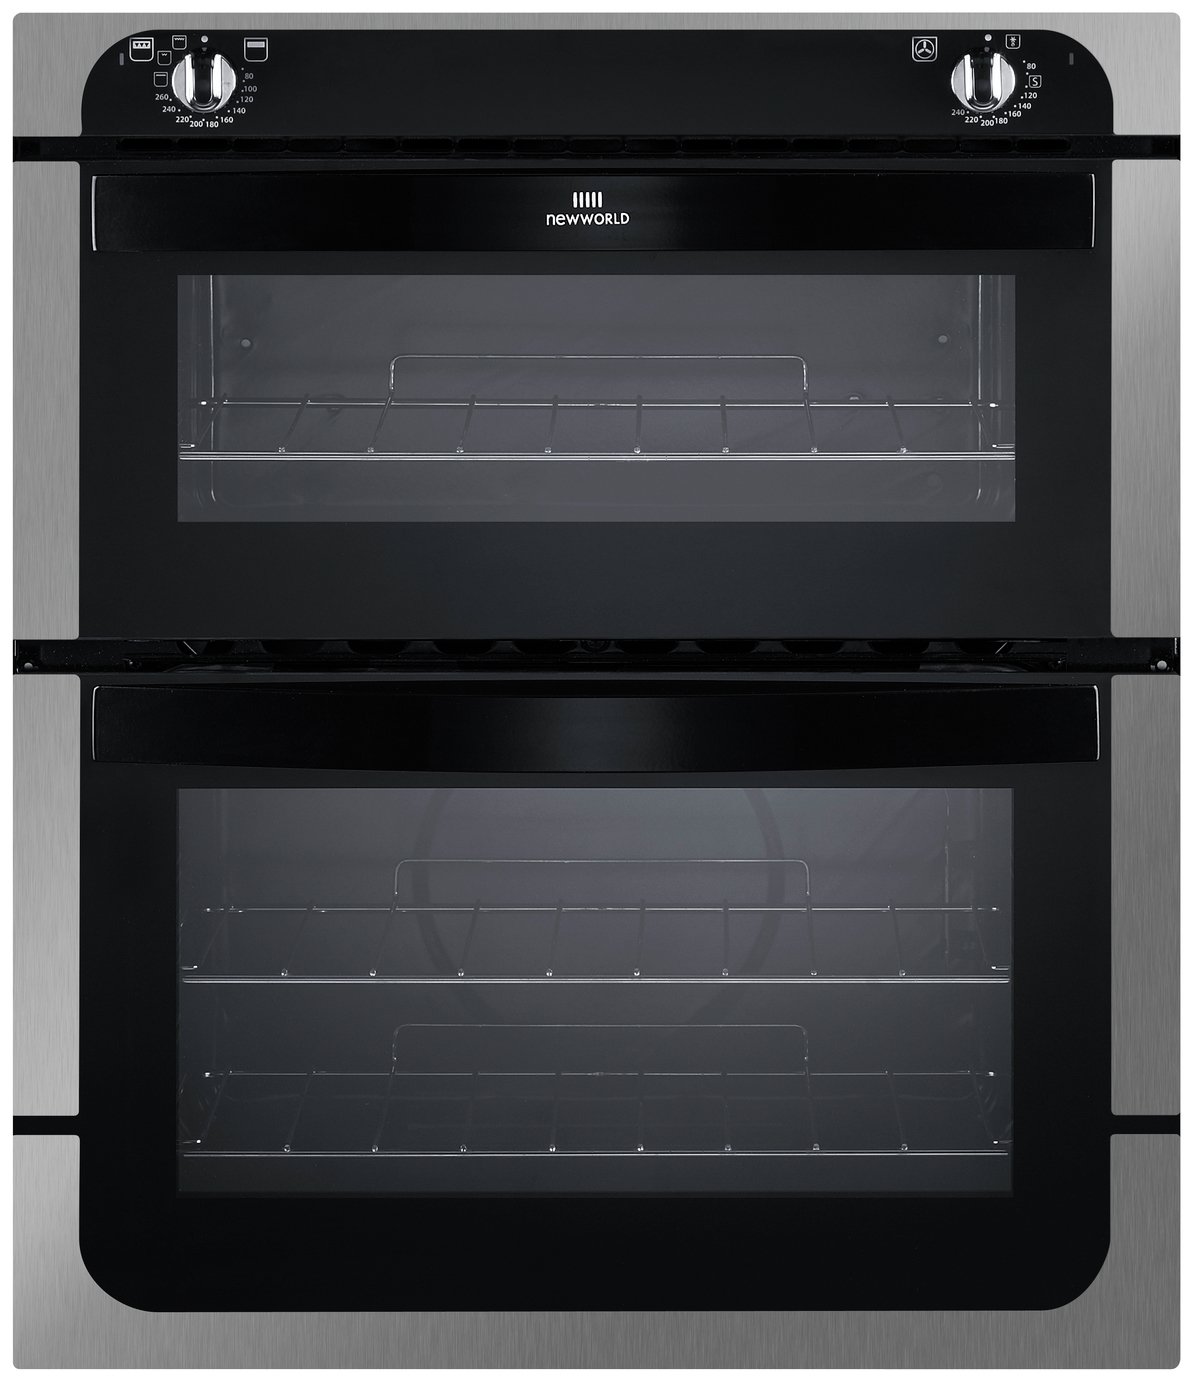 New World NW701DO Double Electric Oven - Stainless Steel